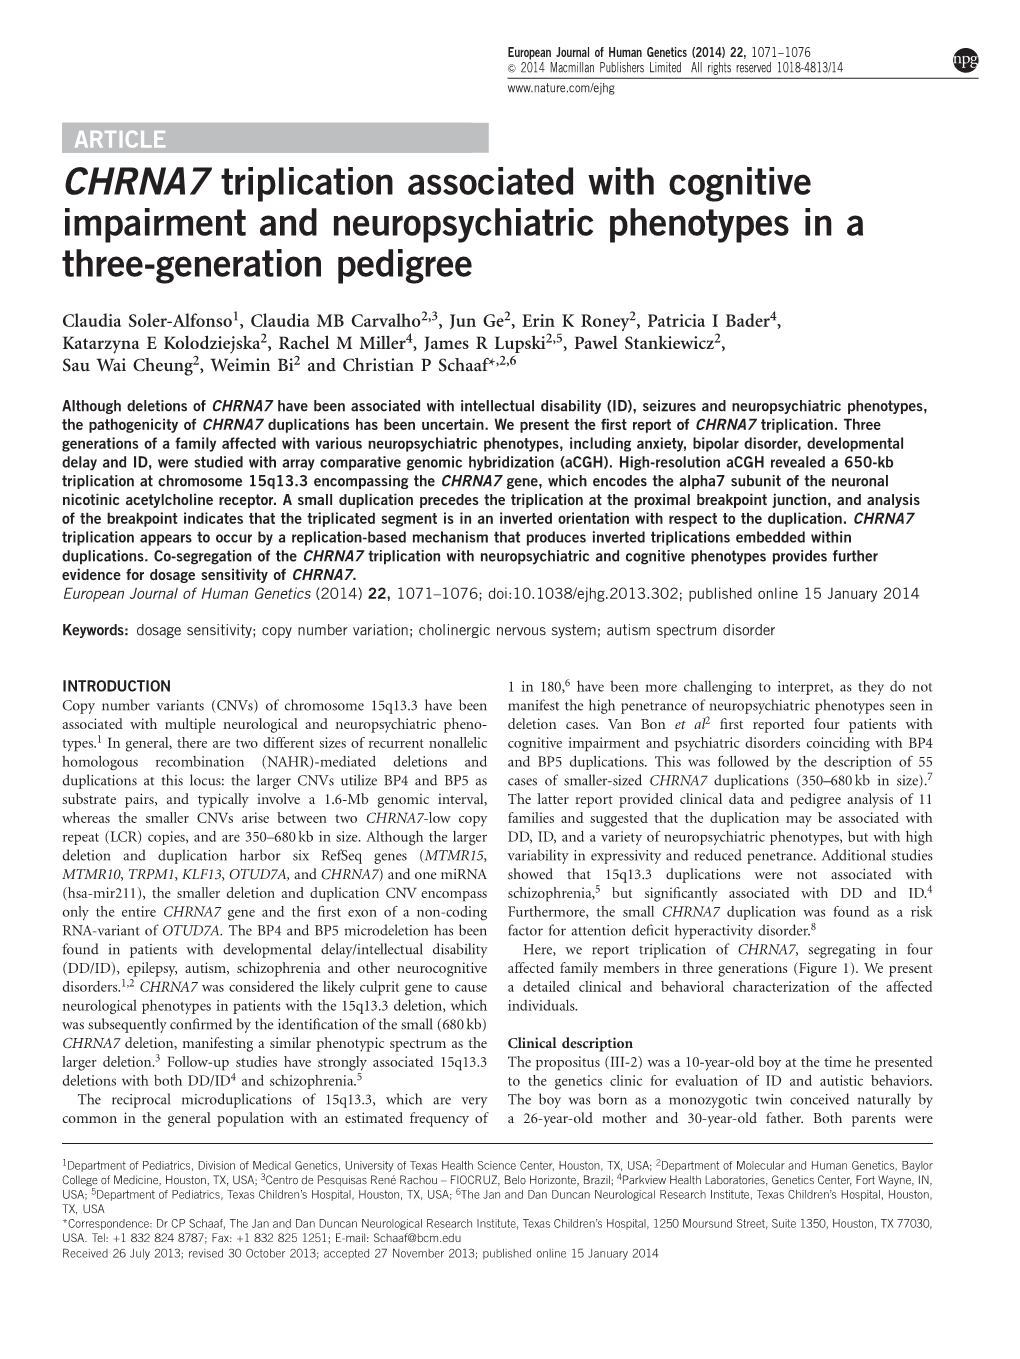 CHRNA7 Triplication Associated with Cognitive Impairment and Neuropsychiatric Phenotypes in a Three-Generation Pedigree